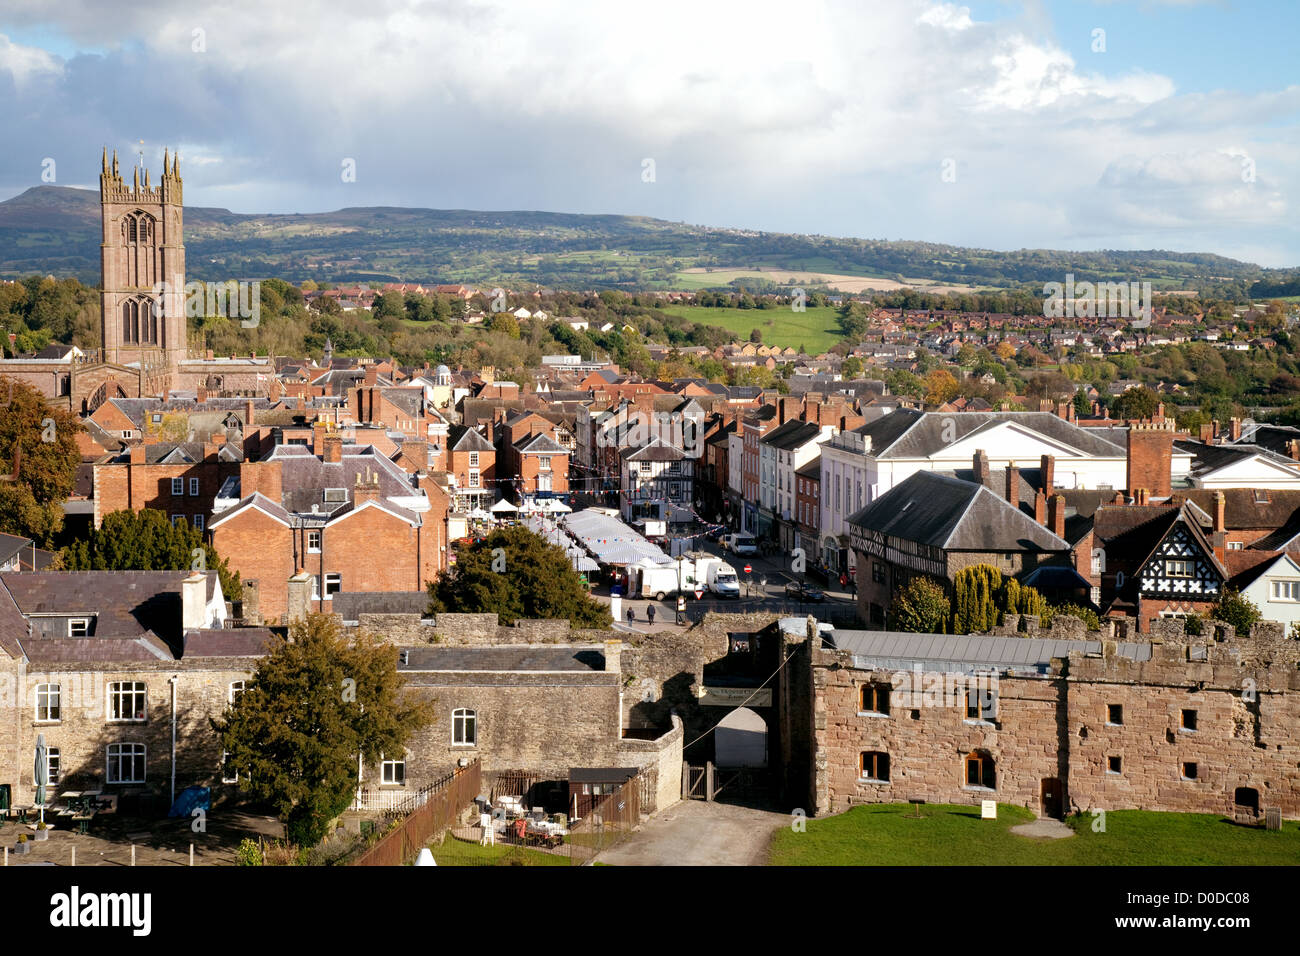 UK town; The historic market town of Ludlow seen from the castle, Shropshire England UK Stock Photo